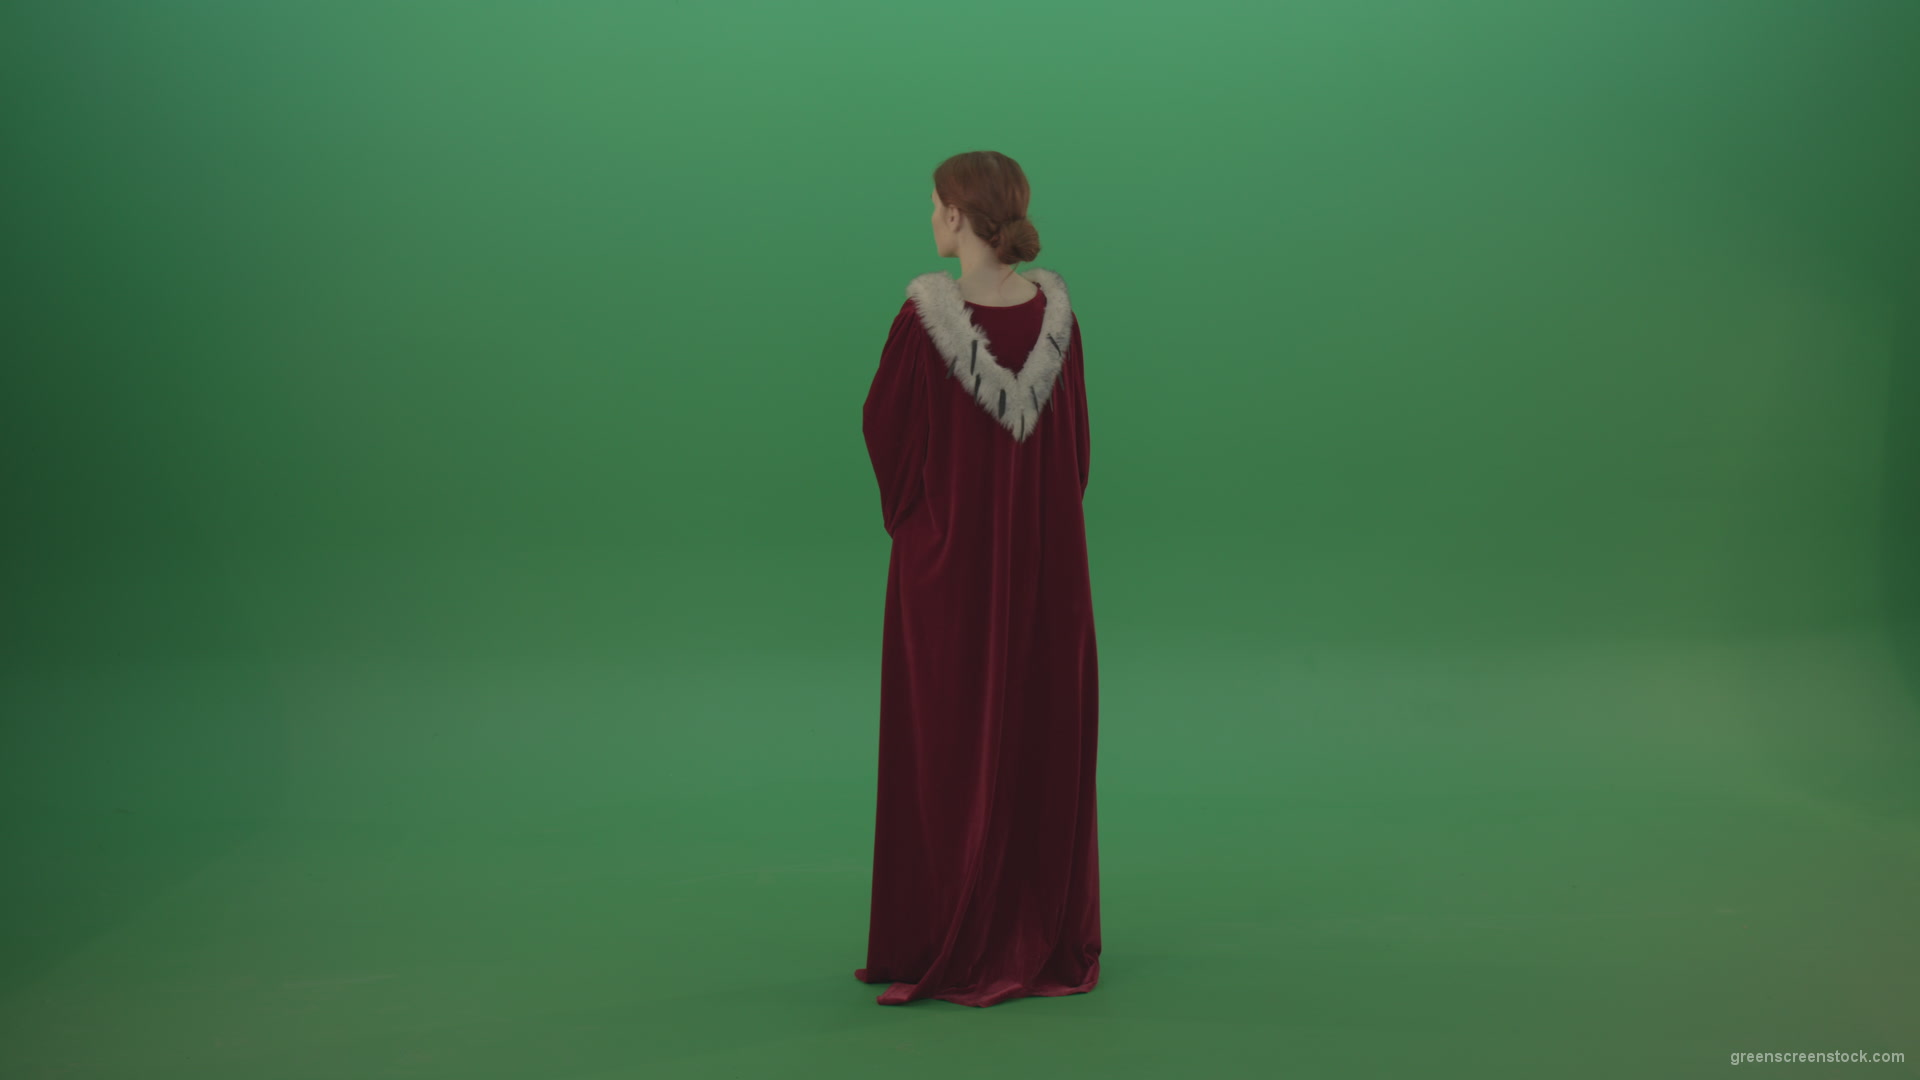 Elegant-woman-princess-with-light-movements-shows-her-beauty-dressed-in-red-cloak-on-a-green-background_006 Green Screen Stock